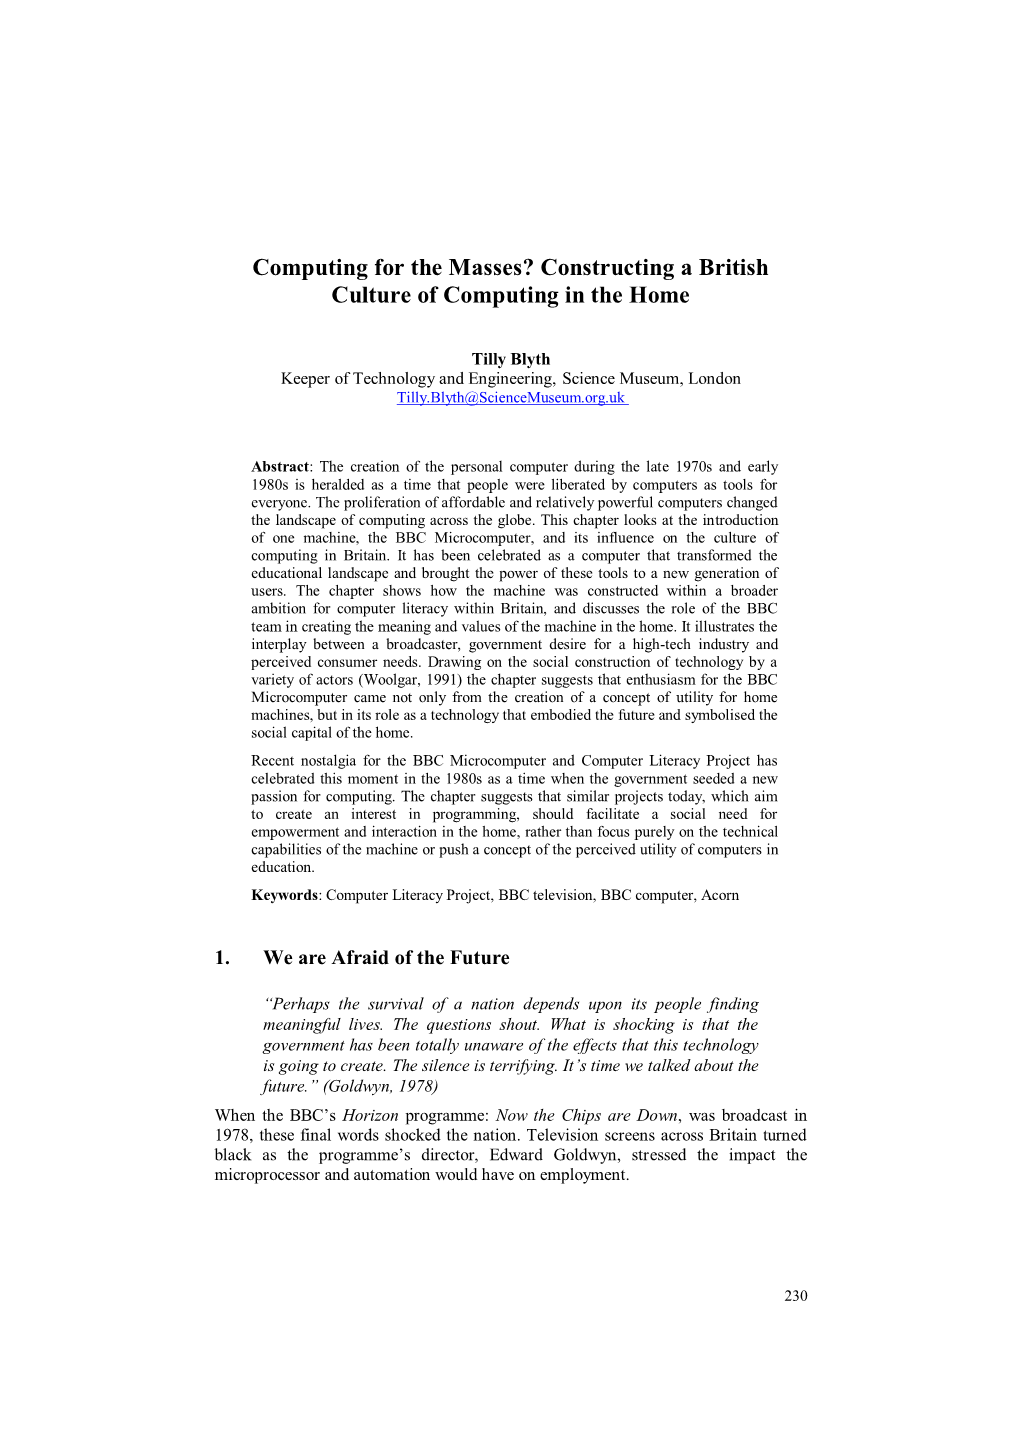 Computing for the Masses? Constructing a British Culture of Computing in the Home